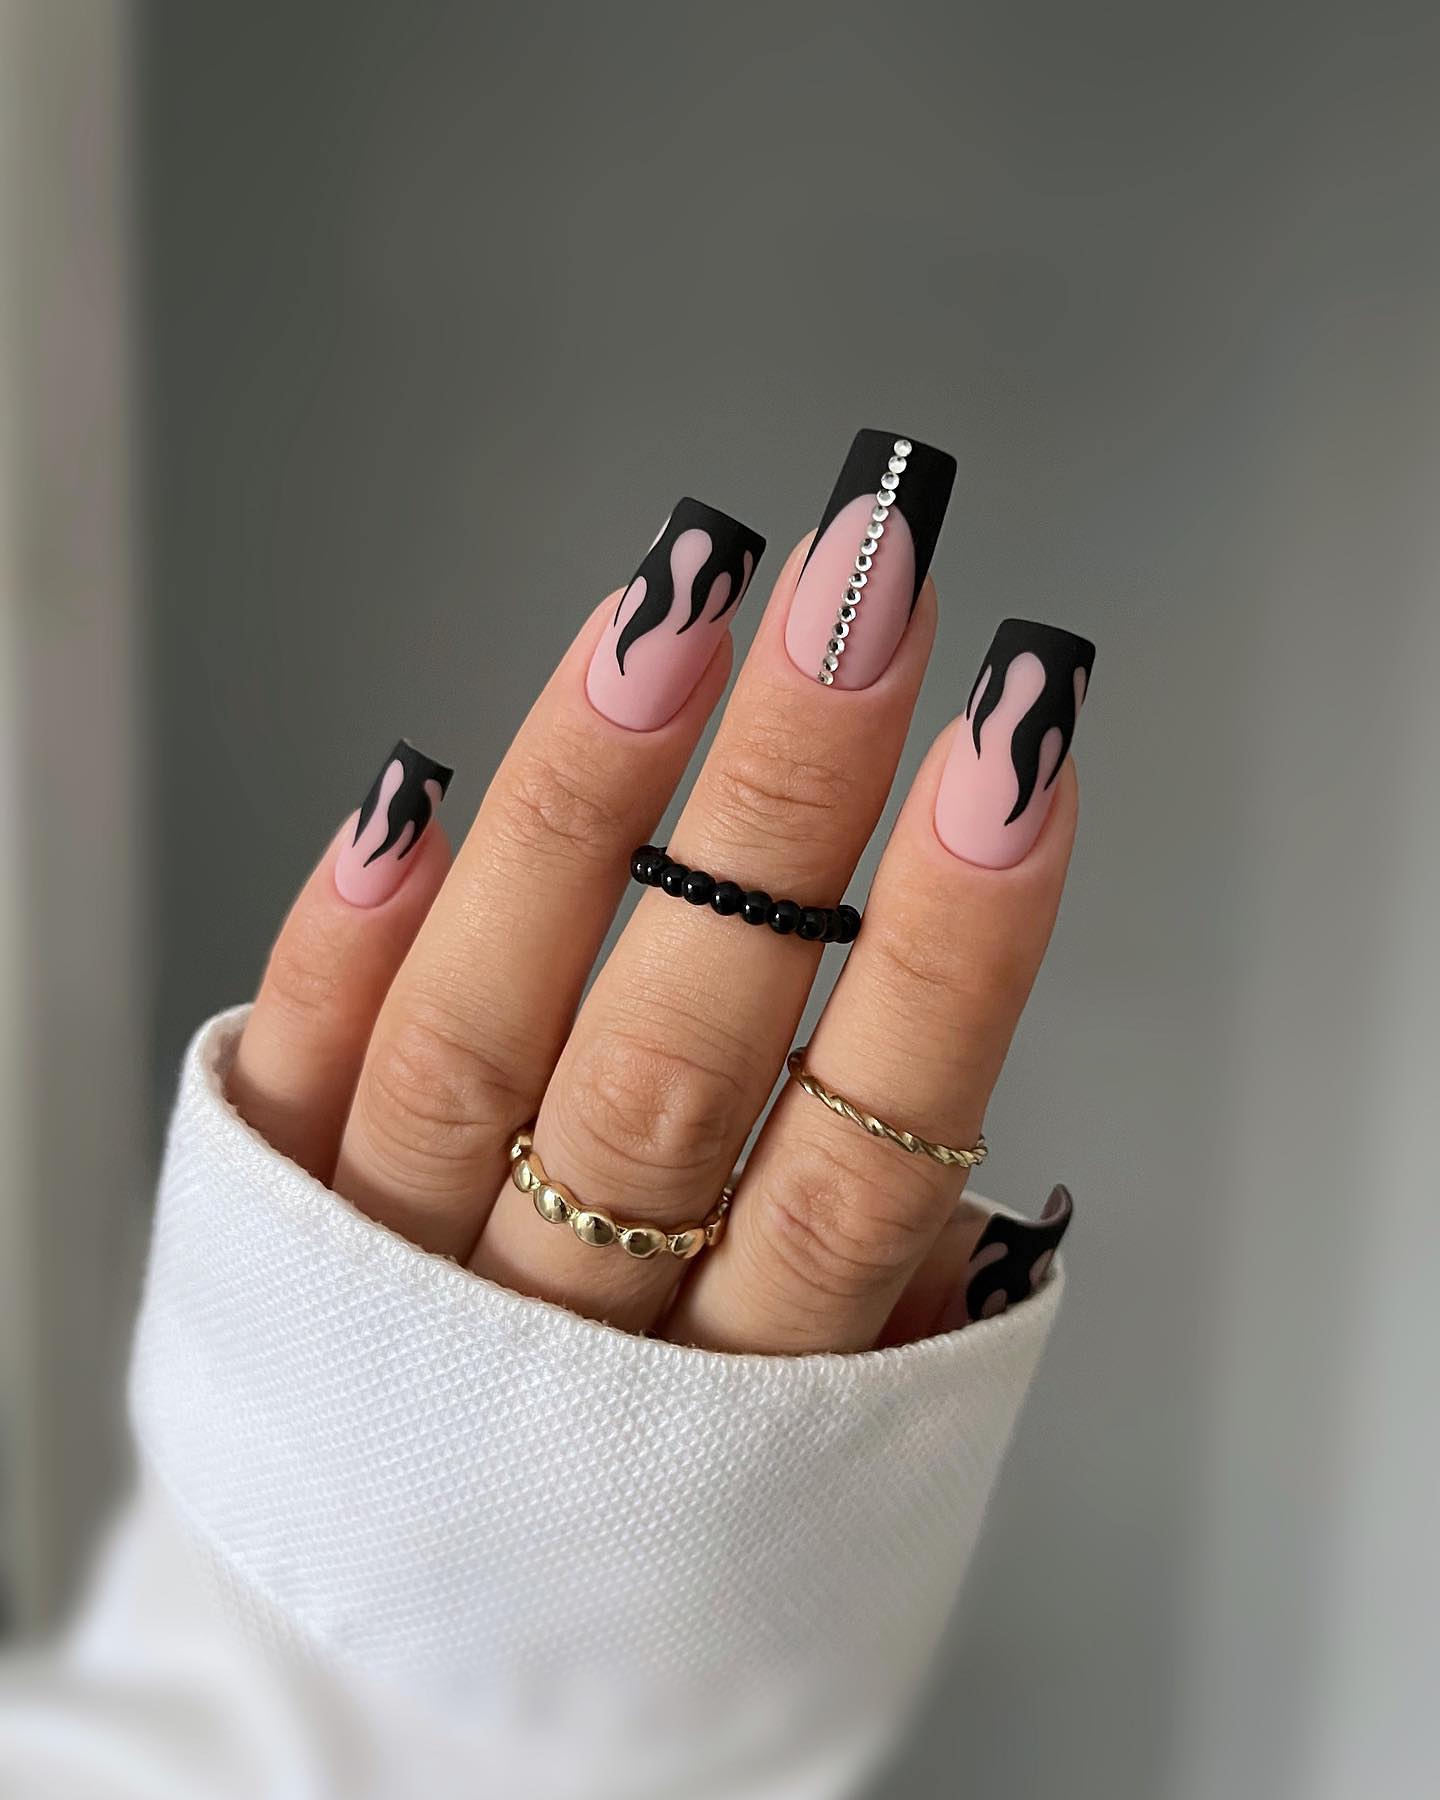 100+ Gorgeous Winter Nail Designs And Ideas images 40